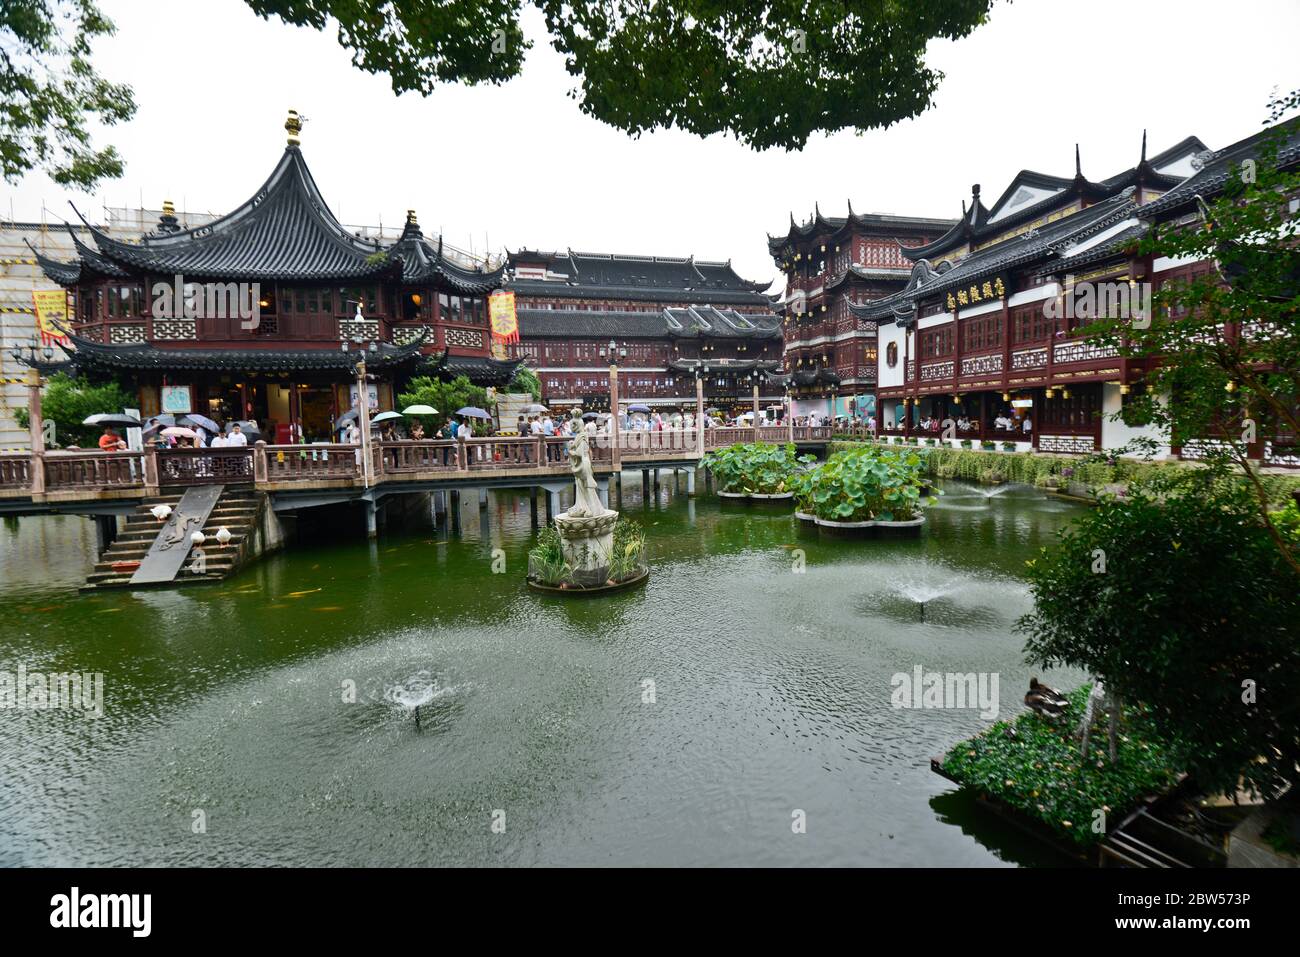 City God Temple of Shanghai: Pavilions and teahouses in the Chenghuang Miao area. China Stock Photo